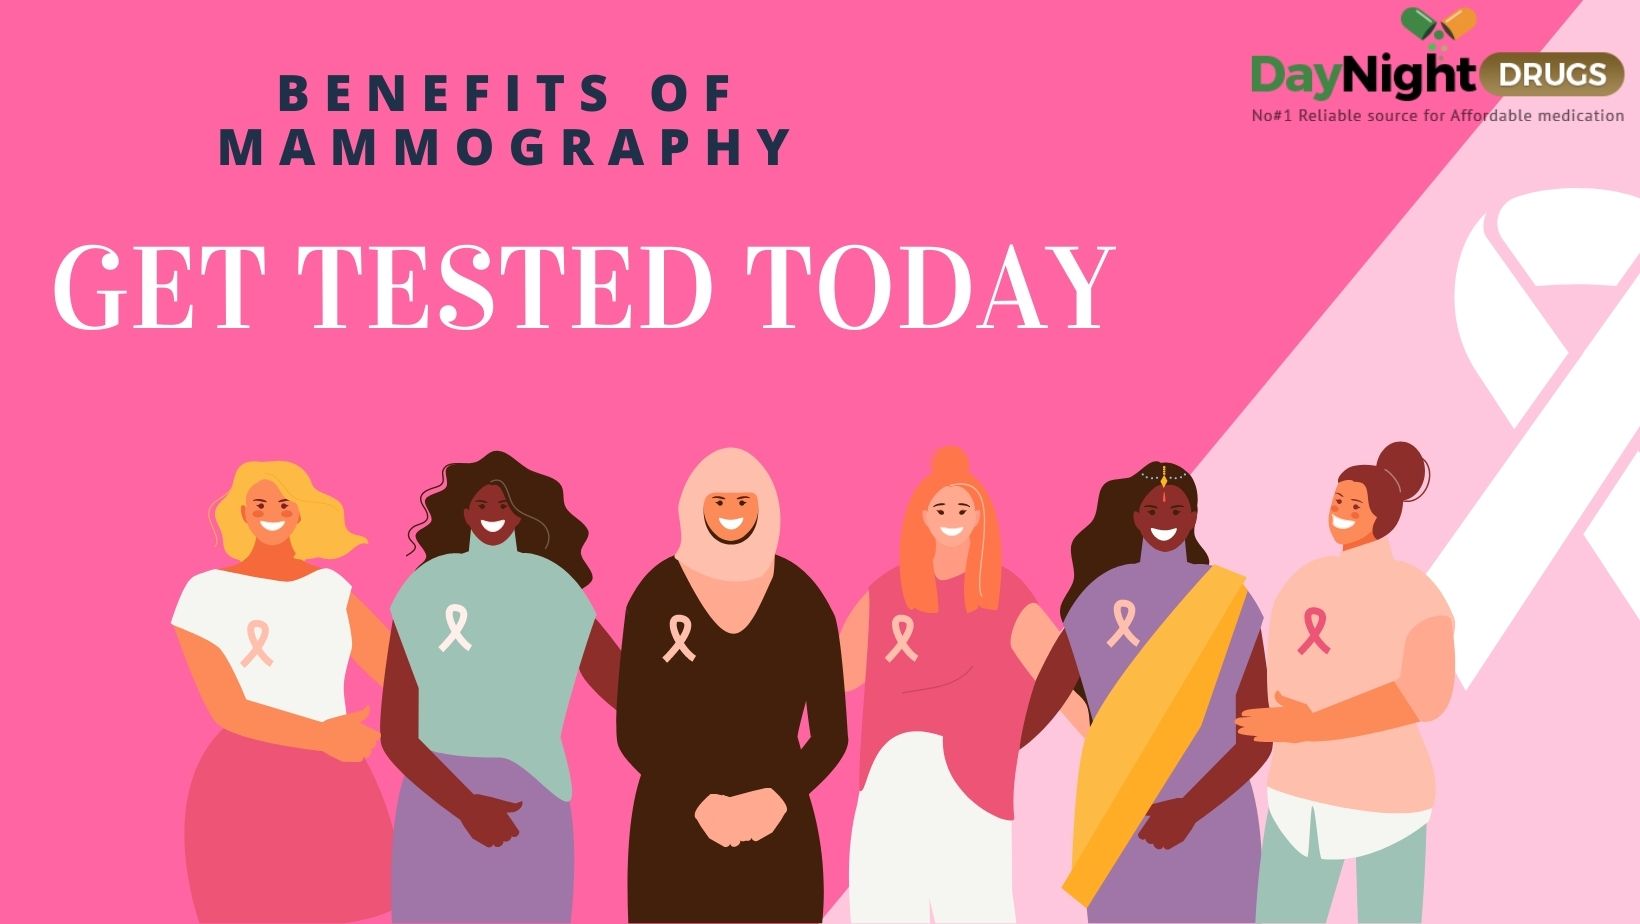 Breast cancer and mammography